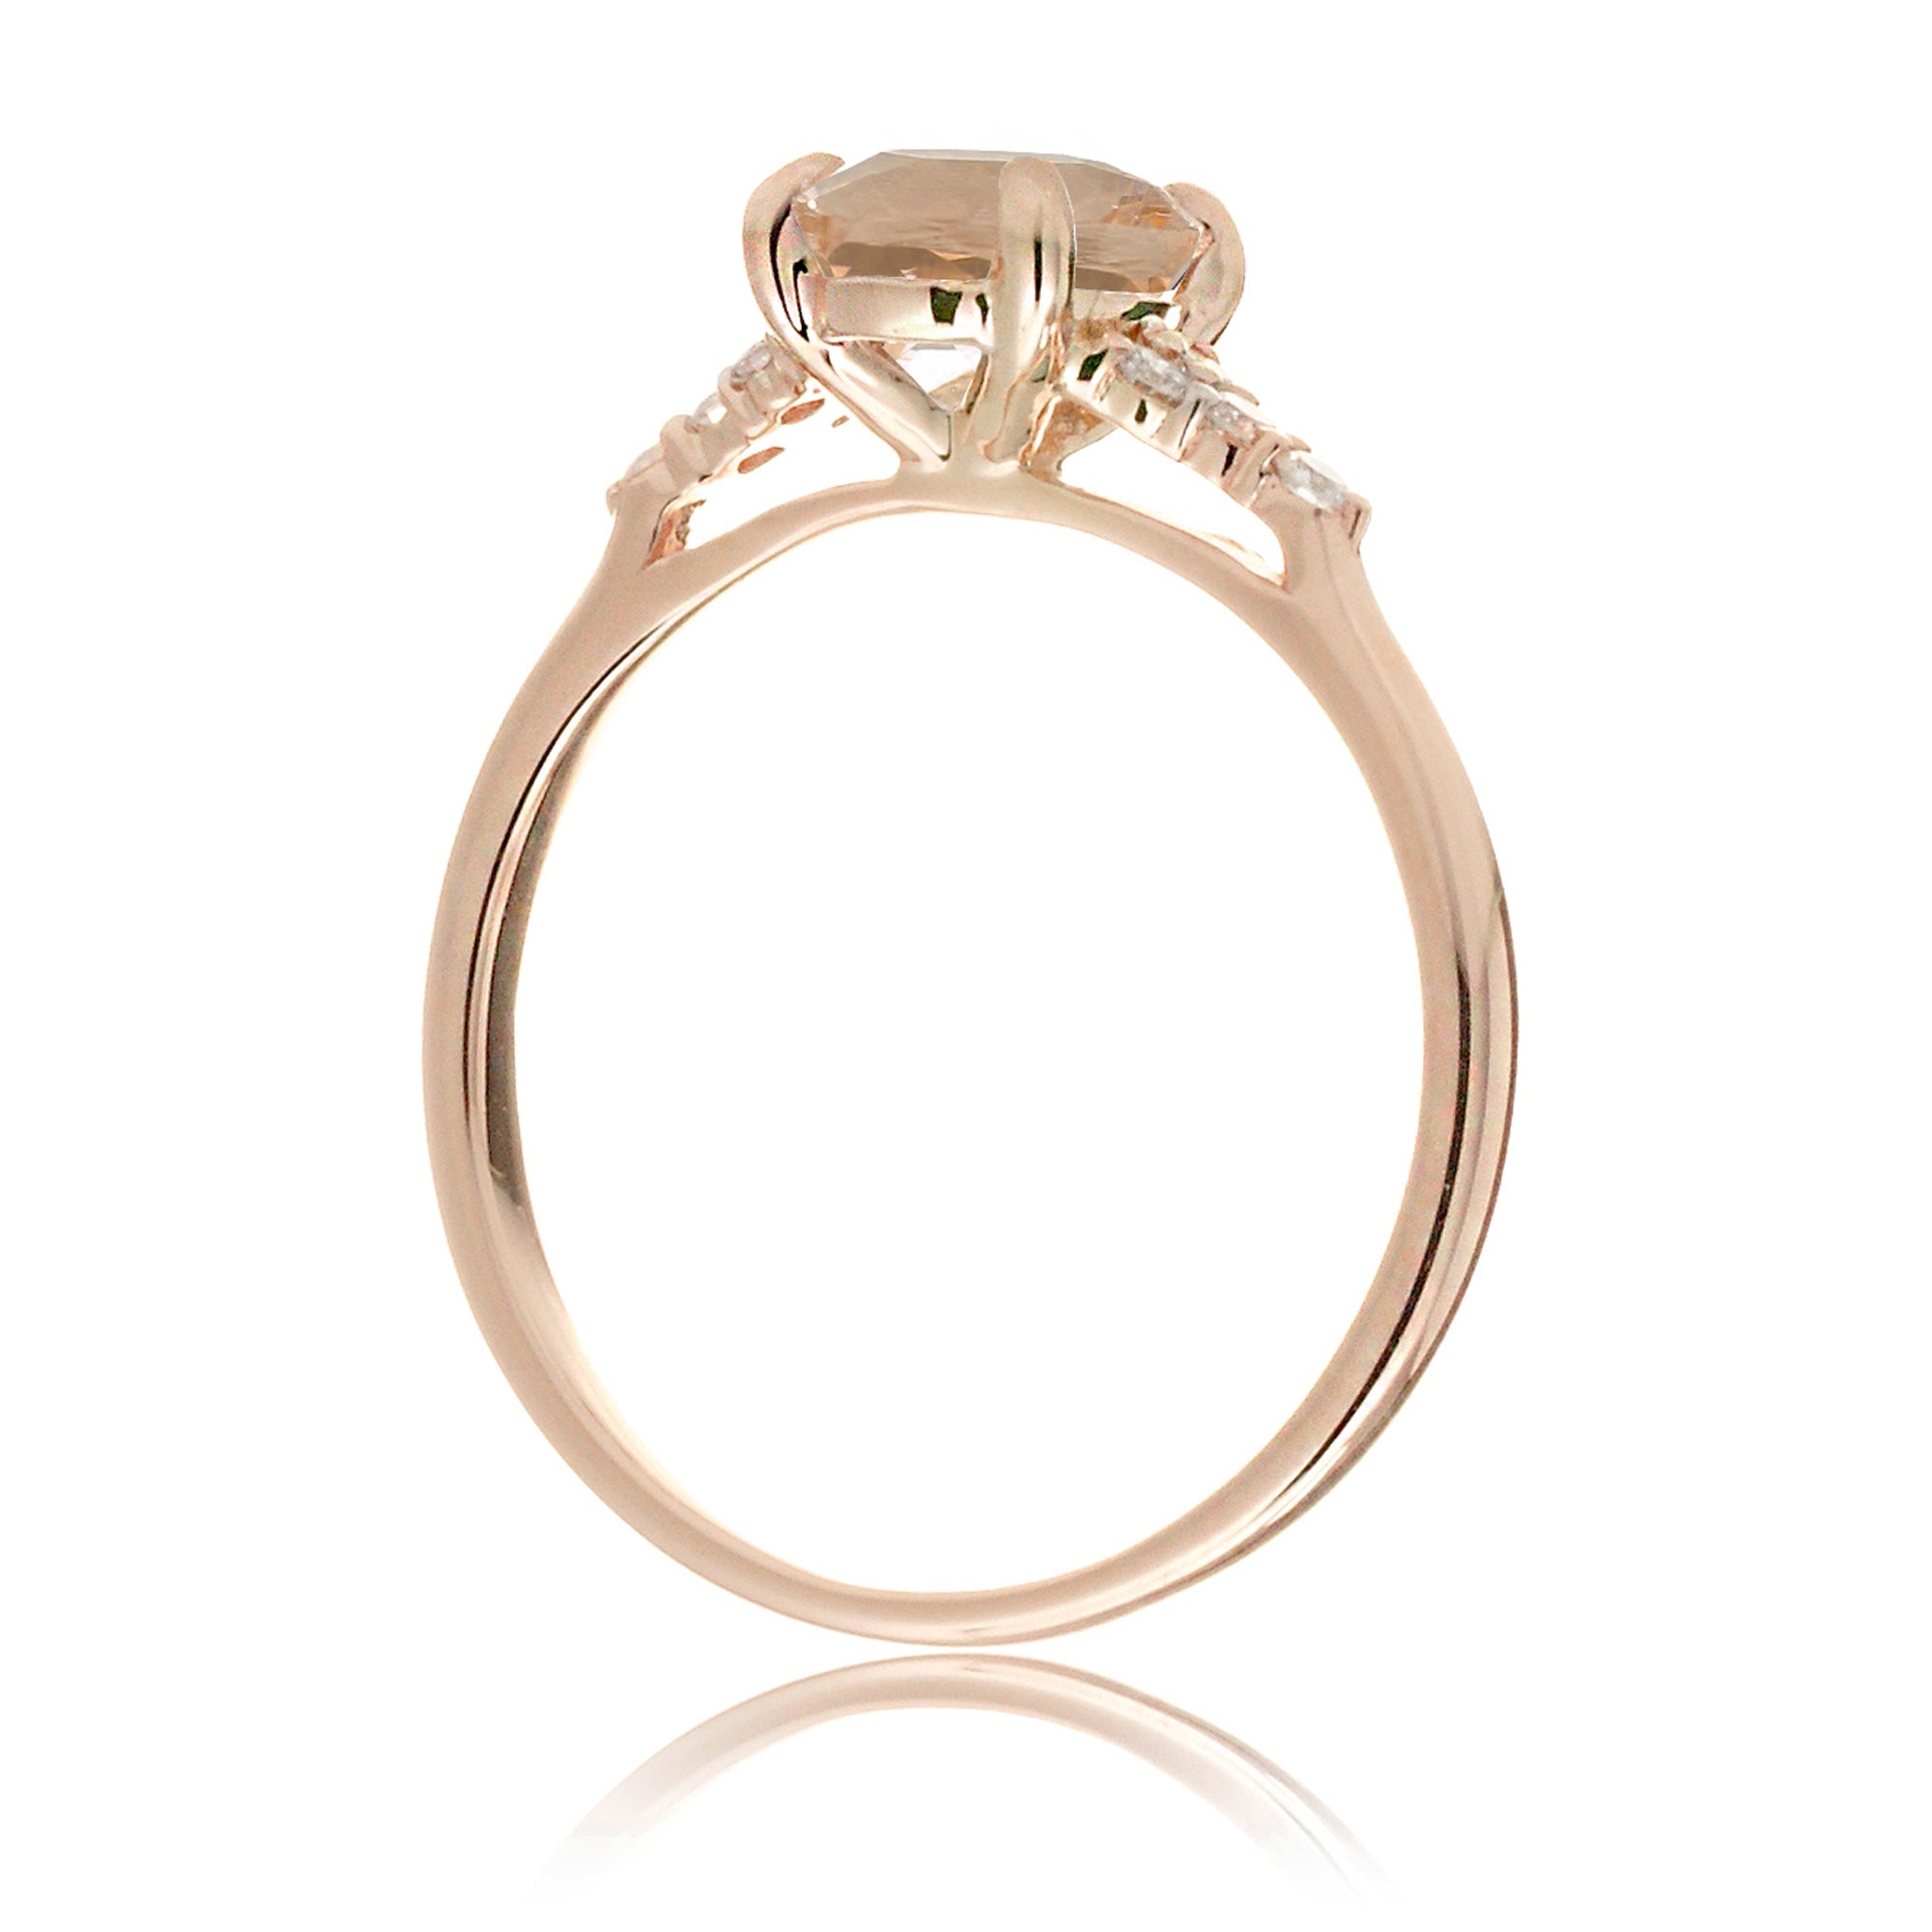 Pear cut natural morganite and diamond engagement ring in rose gold - the Chloe